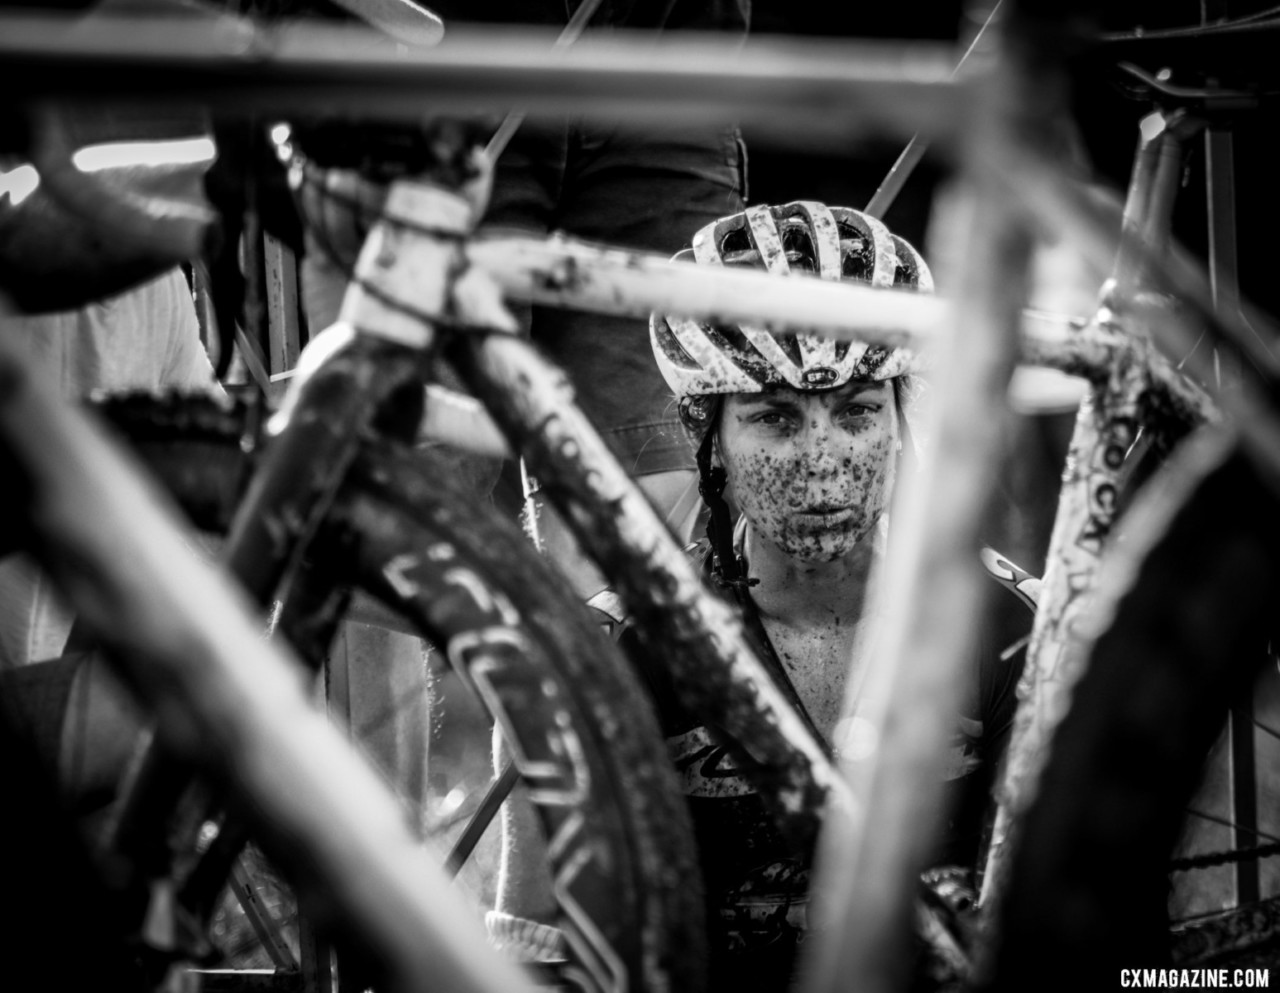 Caroline Nolan suffered at the end of Sunday's UCI C1 due to an asthma attack. Faces of 2019 Jingle Cross. © D. Mable / Cyclocross Magazine